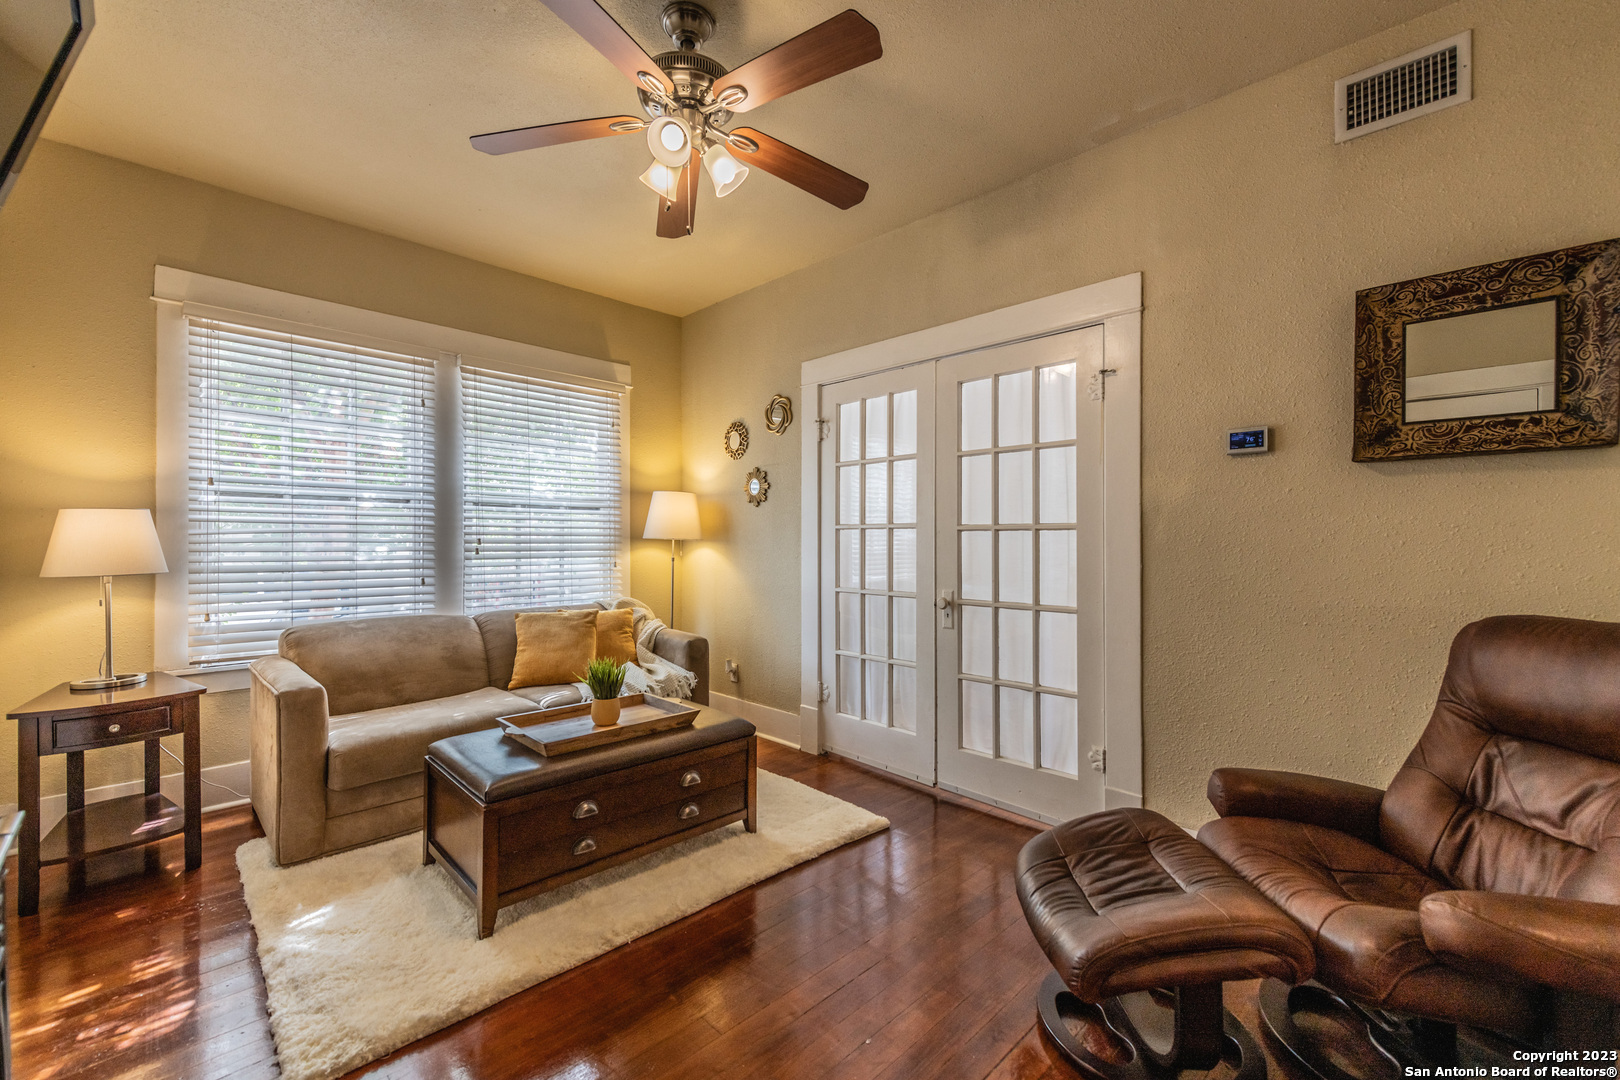 Madison Condos are TRULY in the HEART of King William Historic District in Southtown San Antonio! Enjoy a walkable lifestyle with coffee shops, restaurants, shopping and more just steps from your front door. This studio condo is perfect for a minimalist urban lifestyle, second home or a downtown crash pad!